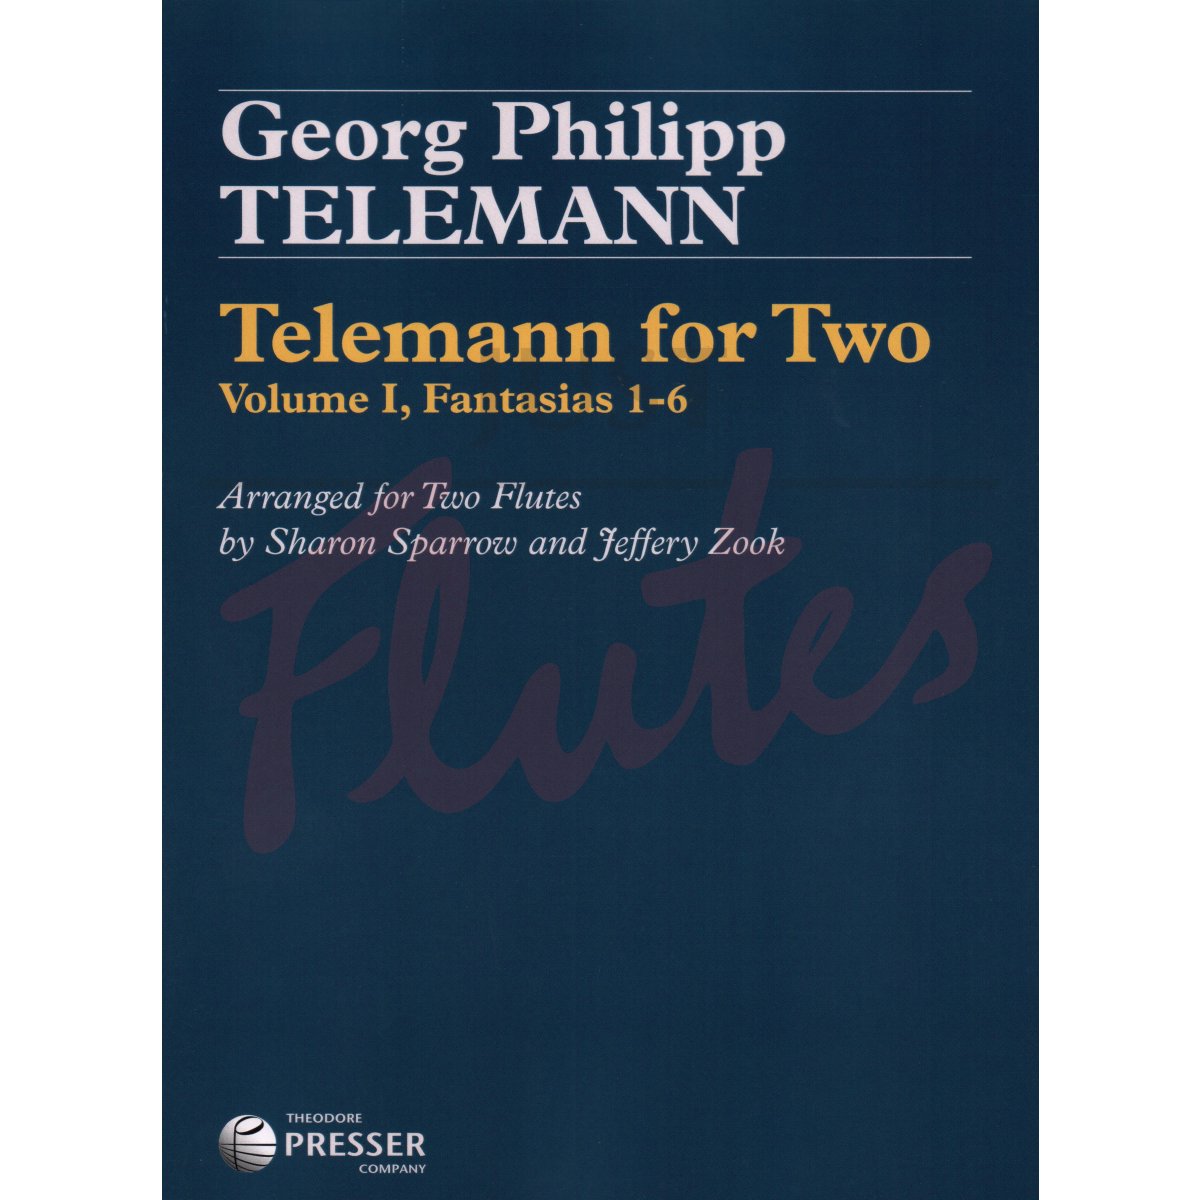 Telemann for Two, Volume 1 arranged for Two Flutes